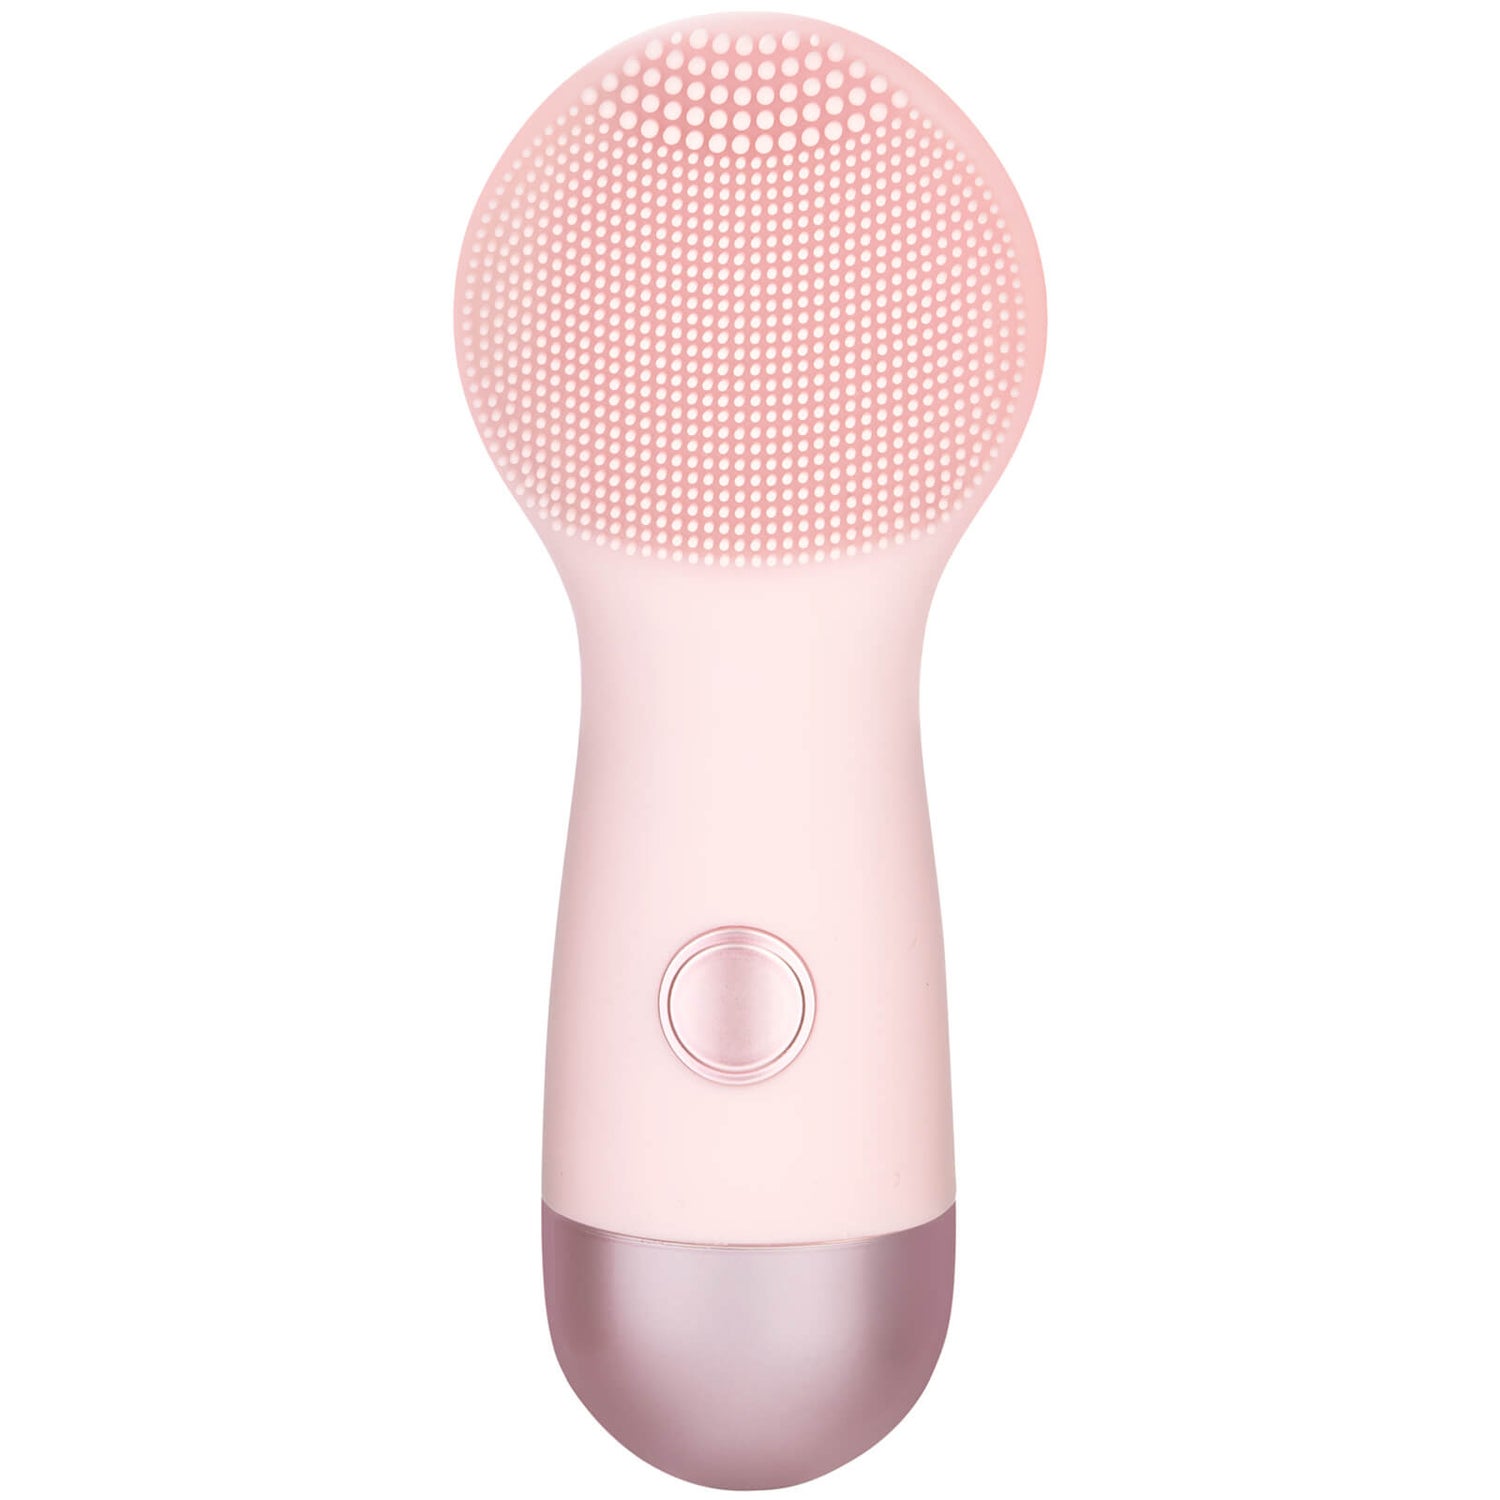 NION Beauty Opus Negative Ion Face Cleansing Device - Luxe-Pink